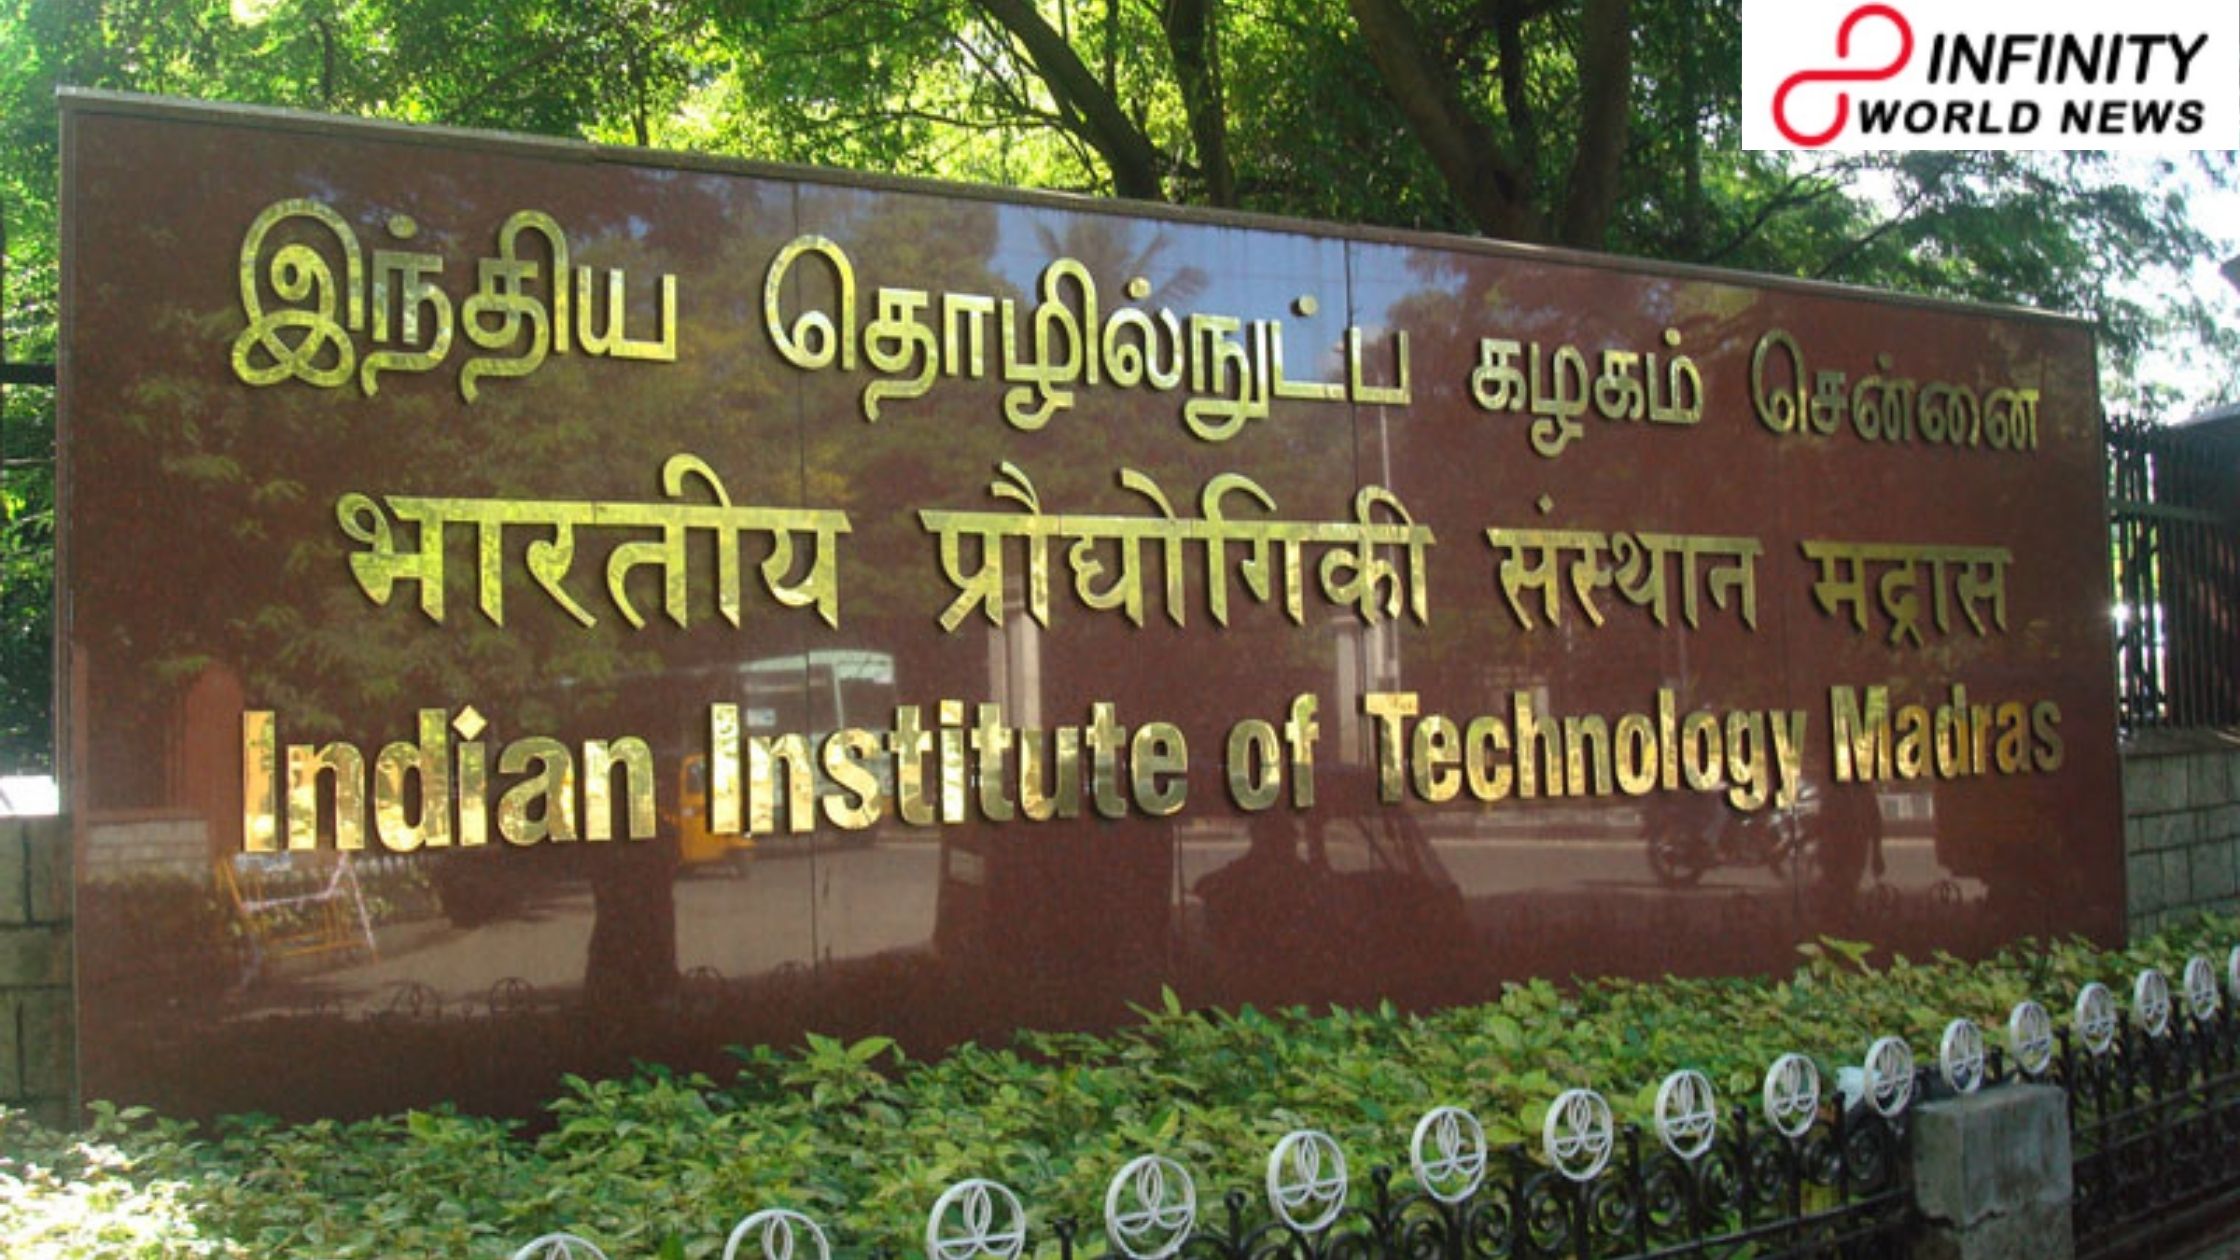 In IIT-Madras Covid spike, positive cases ascend to 183